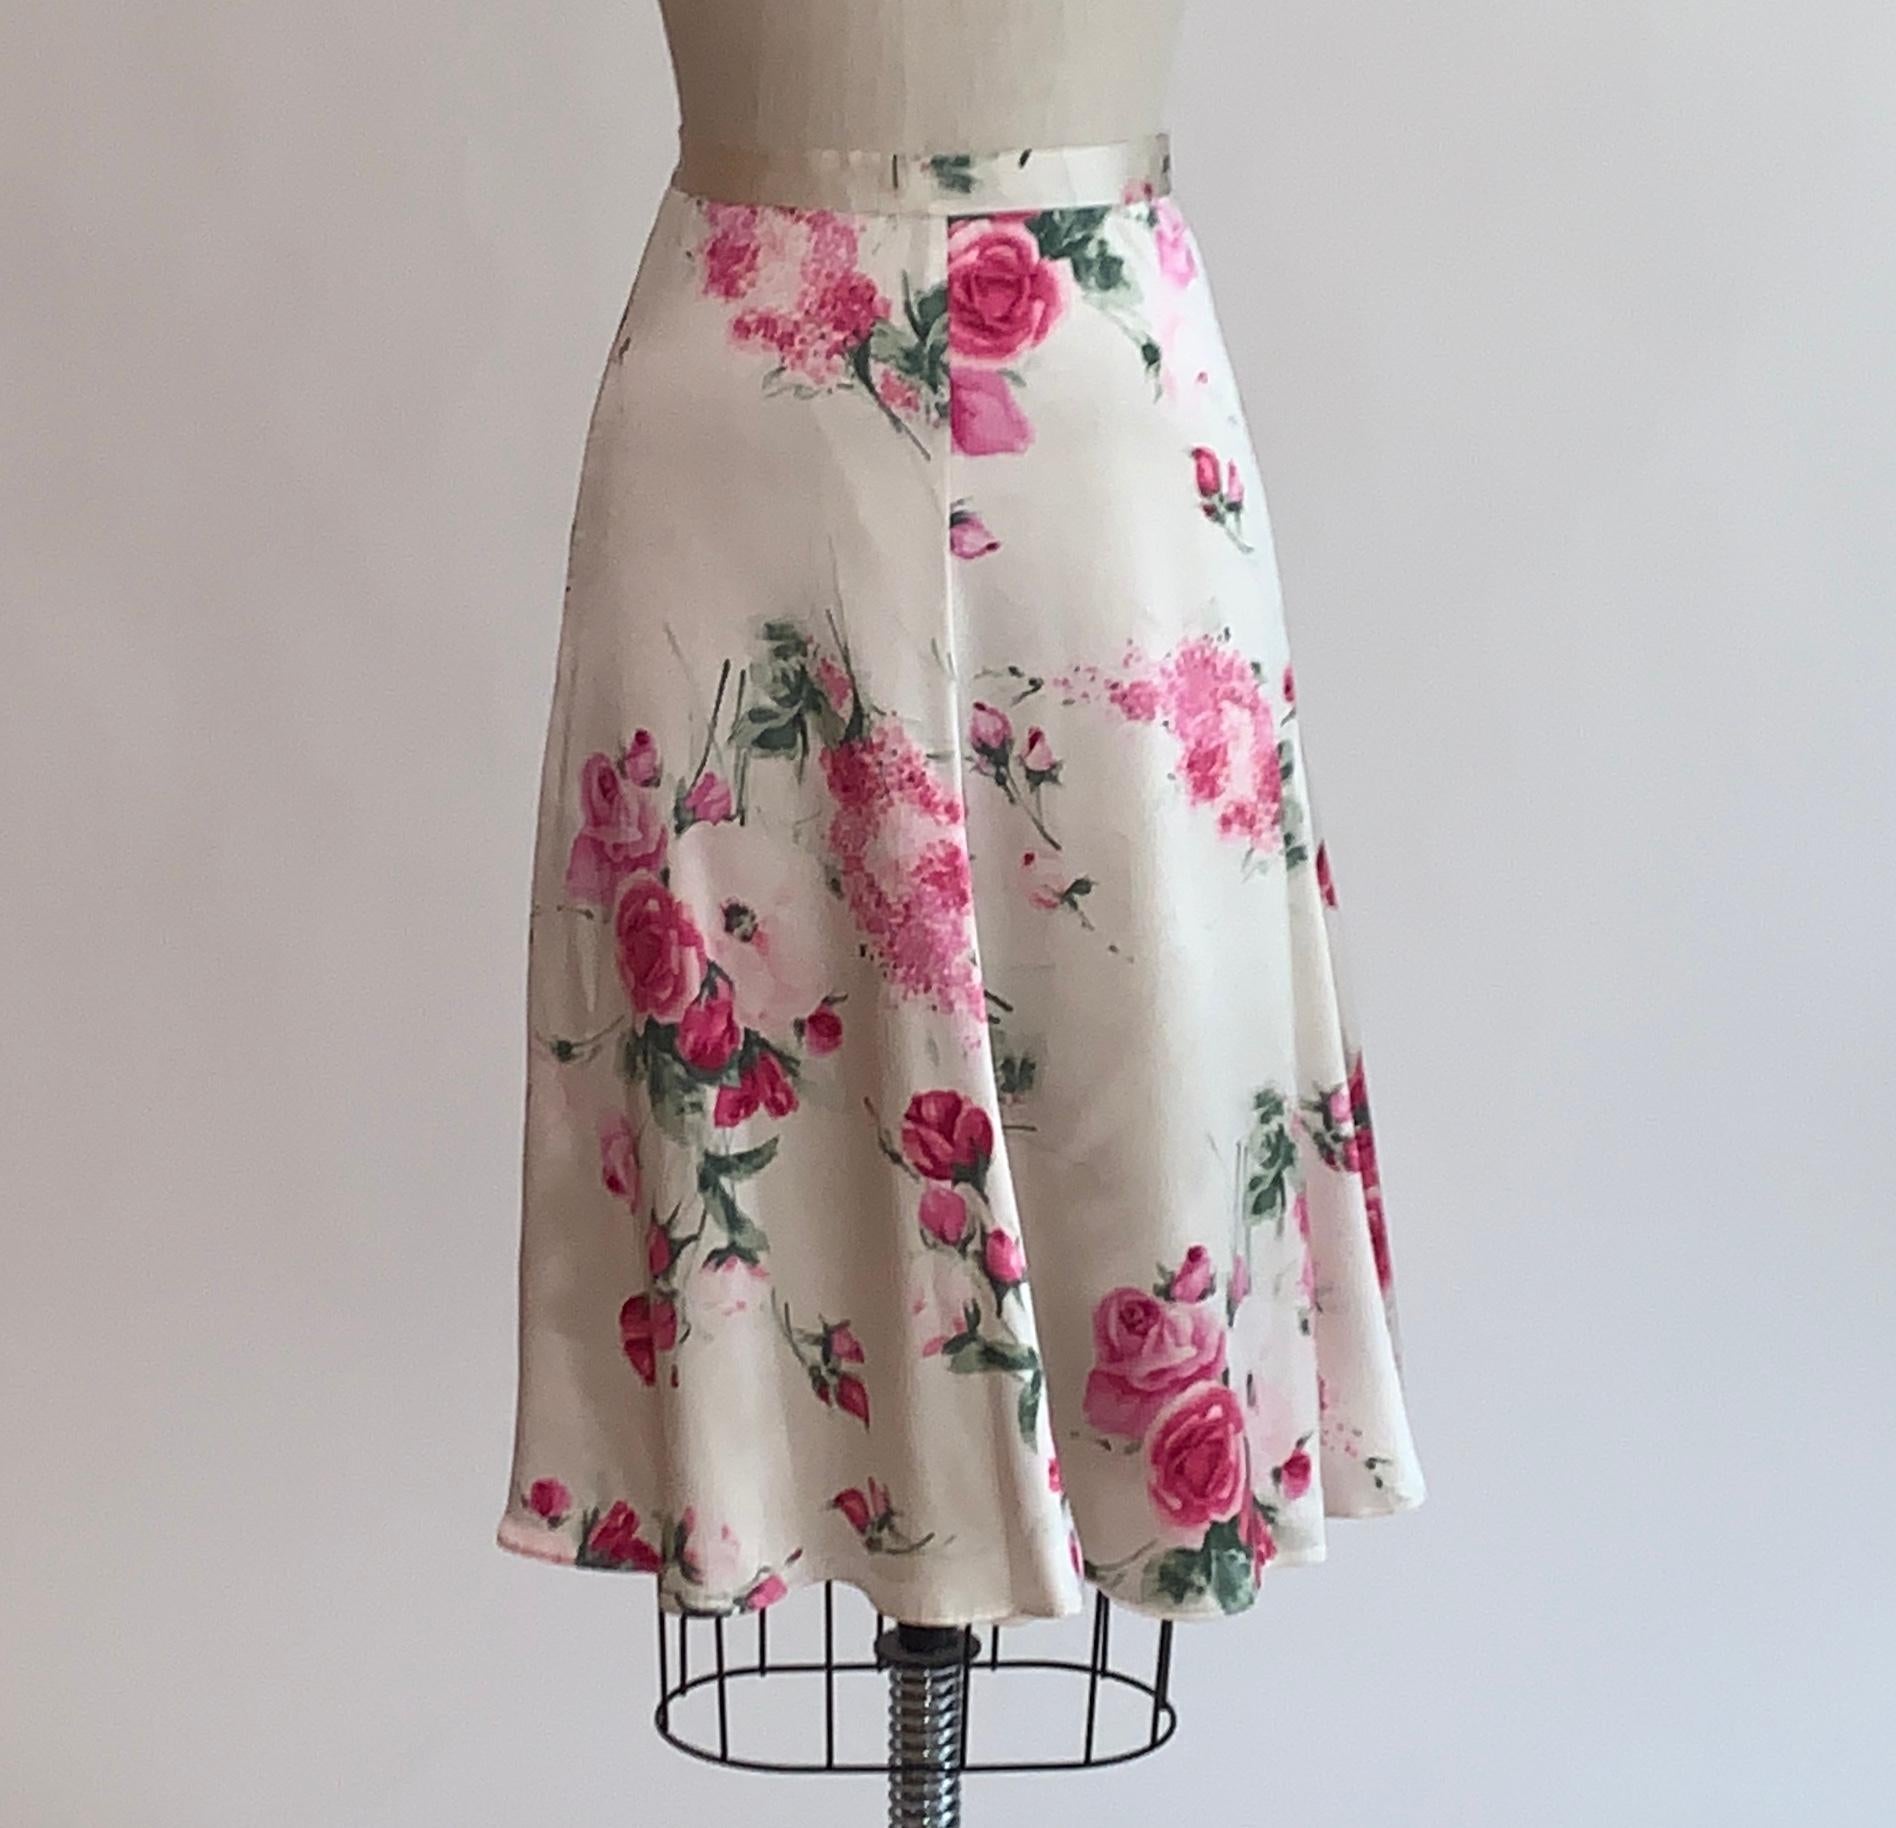 Dolce and Gabbana floral print skirt in a pink and green rose and floral (pink lilac?) pattern on a creamy white background. Back zip and snaps. Branded DG at back zipper pull.

95% silk, 5% spandex.
Fully lined in 78% acetate, 6% spandex, 16%